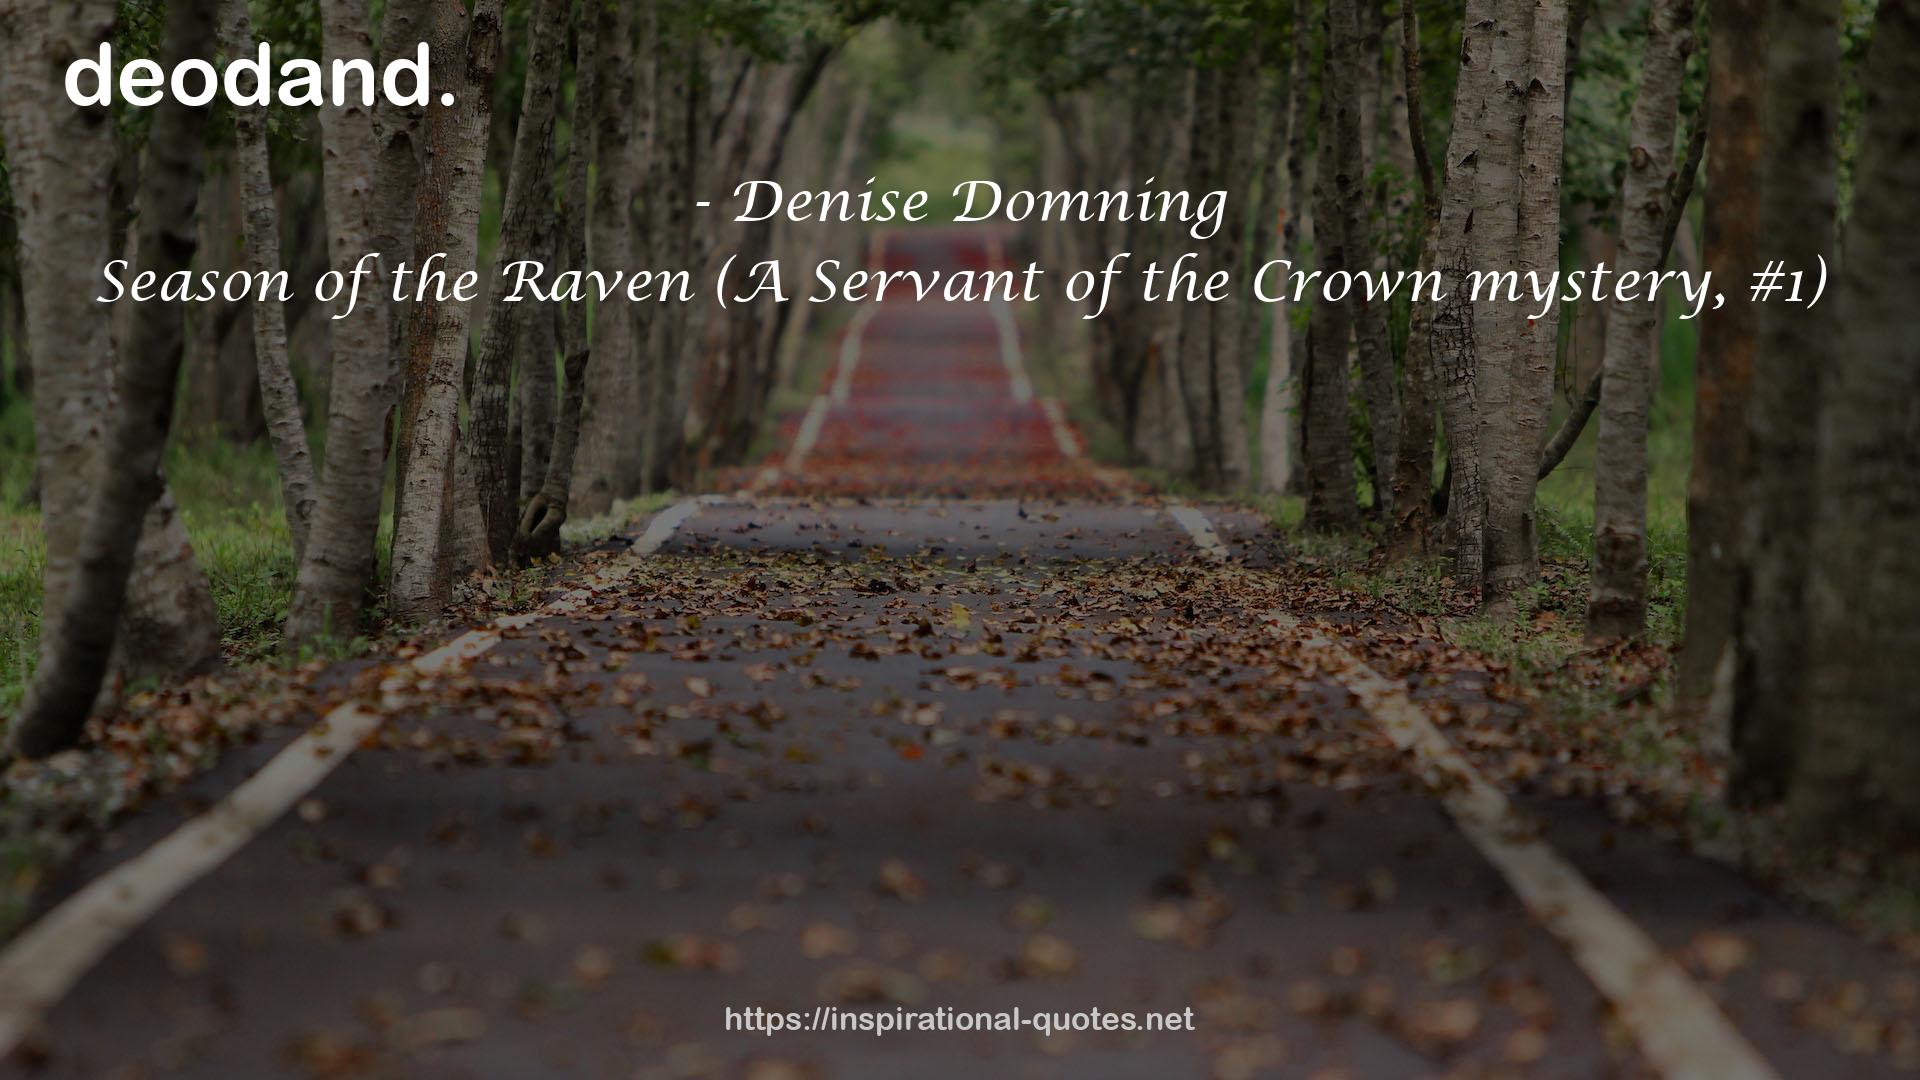 Season of the Raven (A Servant of the Crown mystery, #1) QUOTES